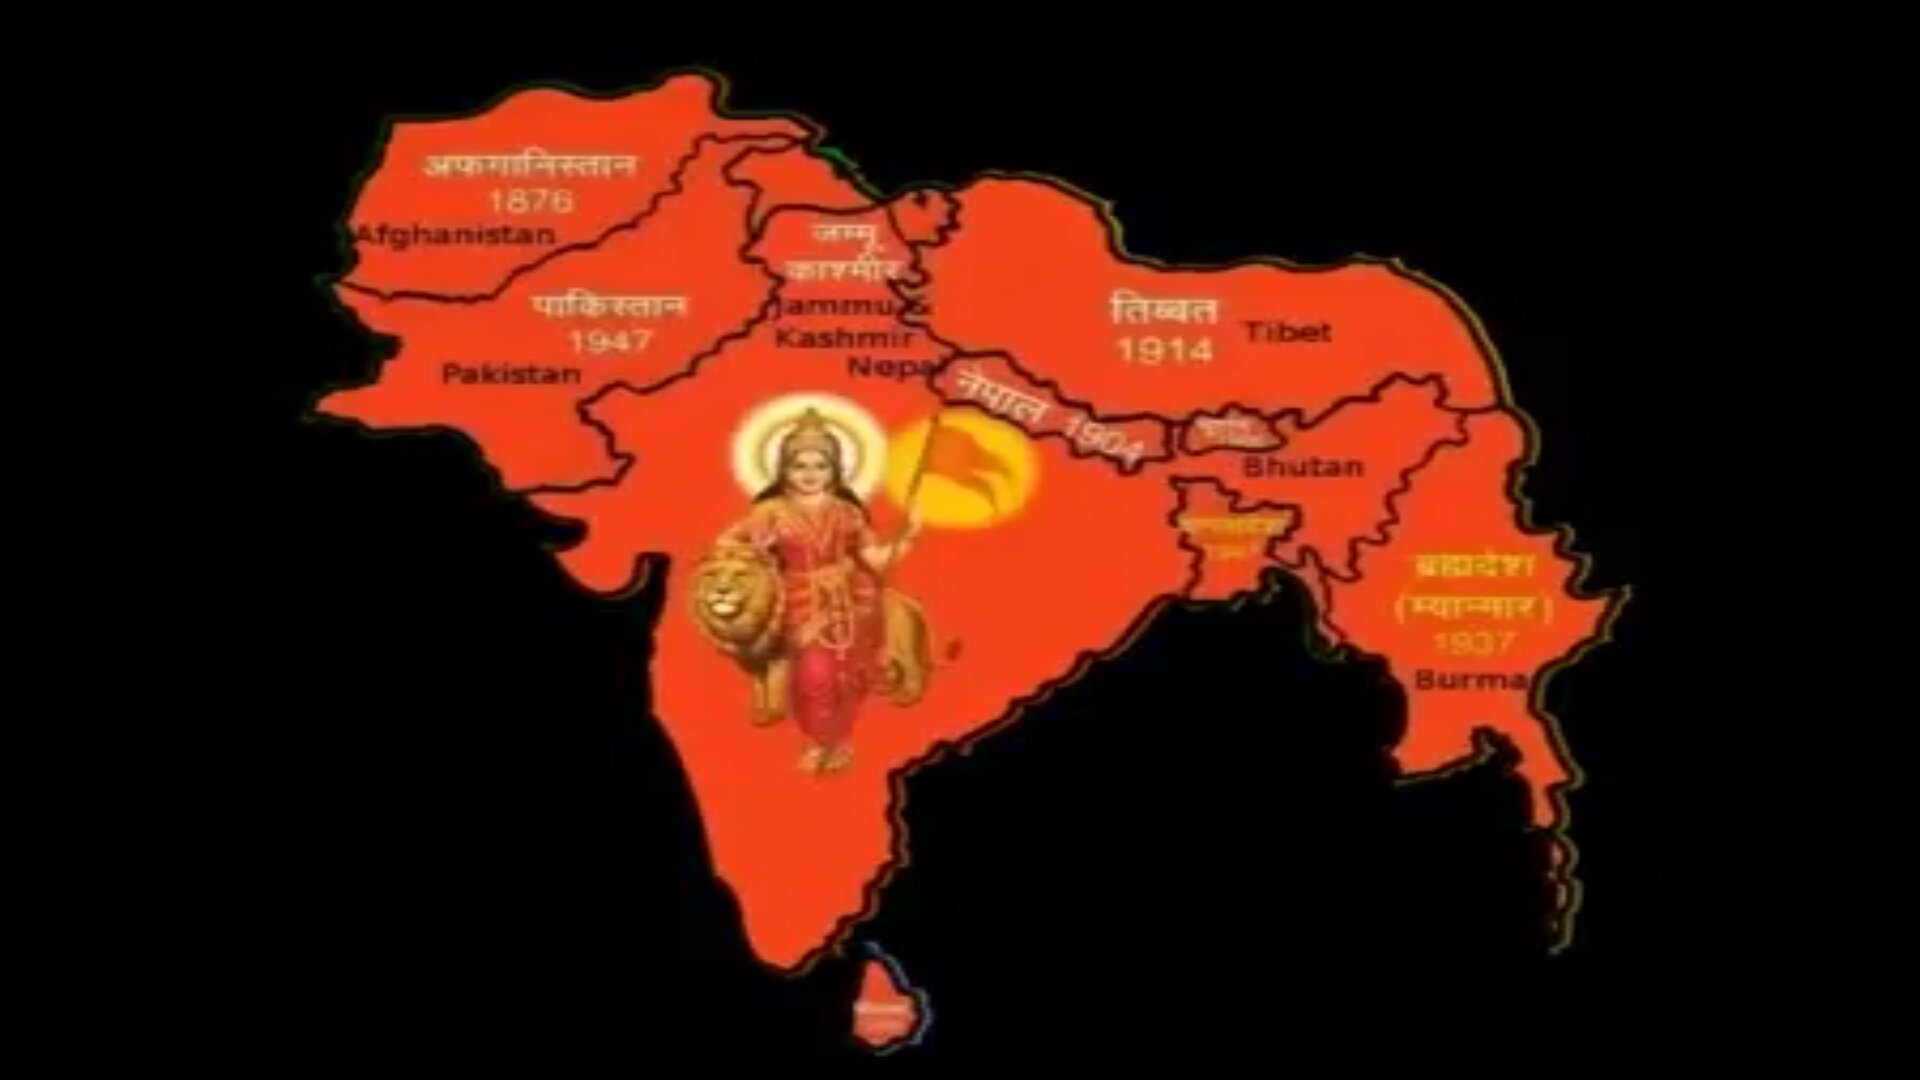 Akhand Bharat  Follow satyasanatandharmhai     Share and spread the wisdom of our culture     Please  support  Instagram